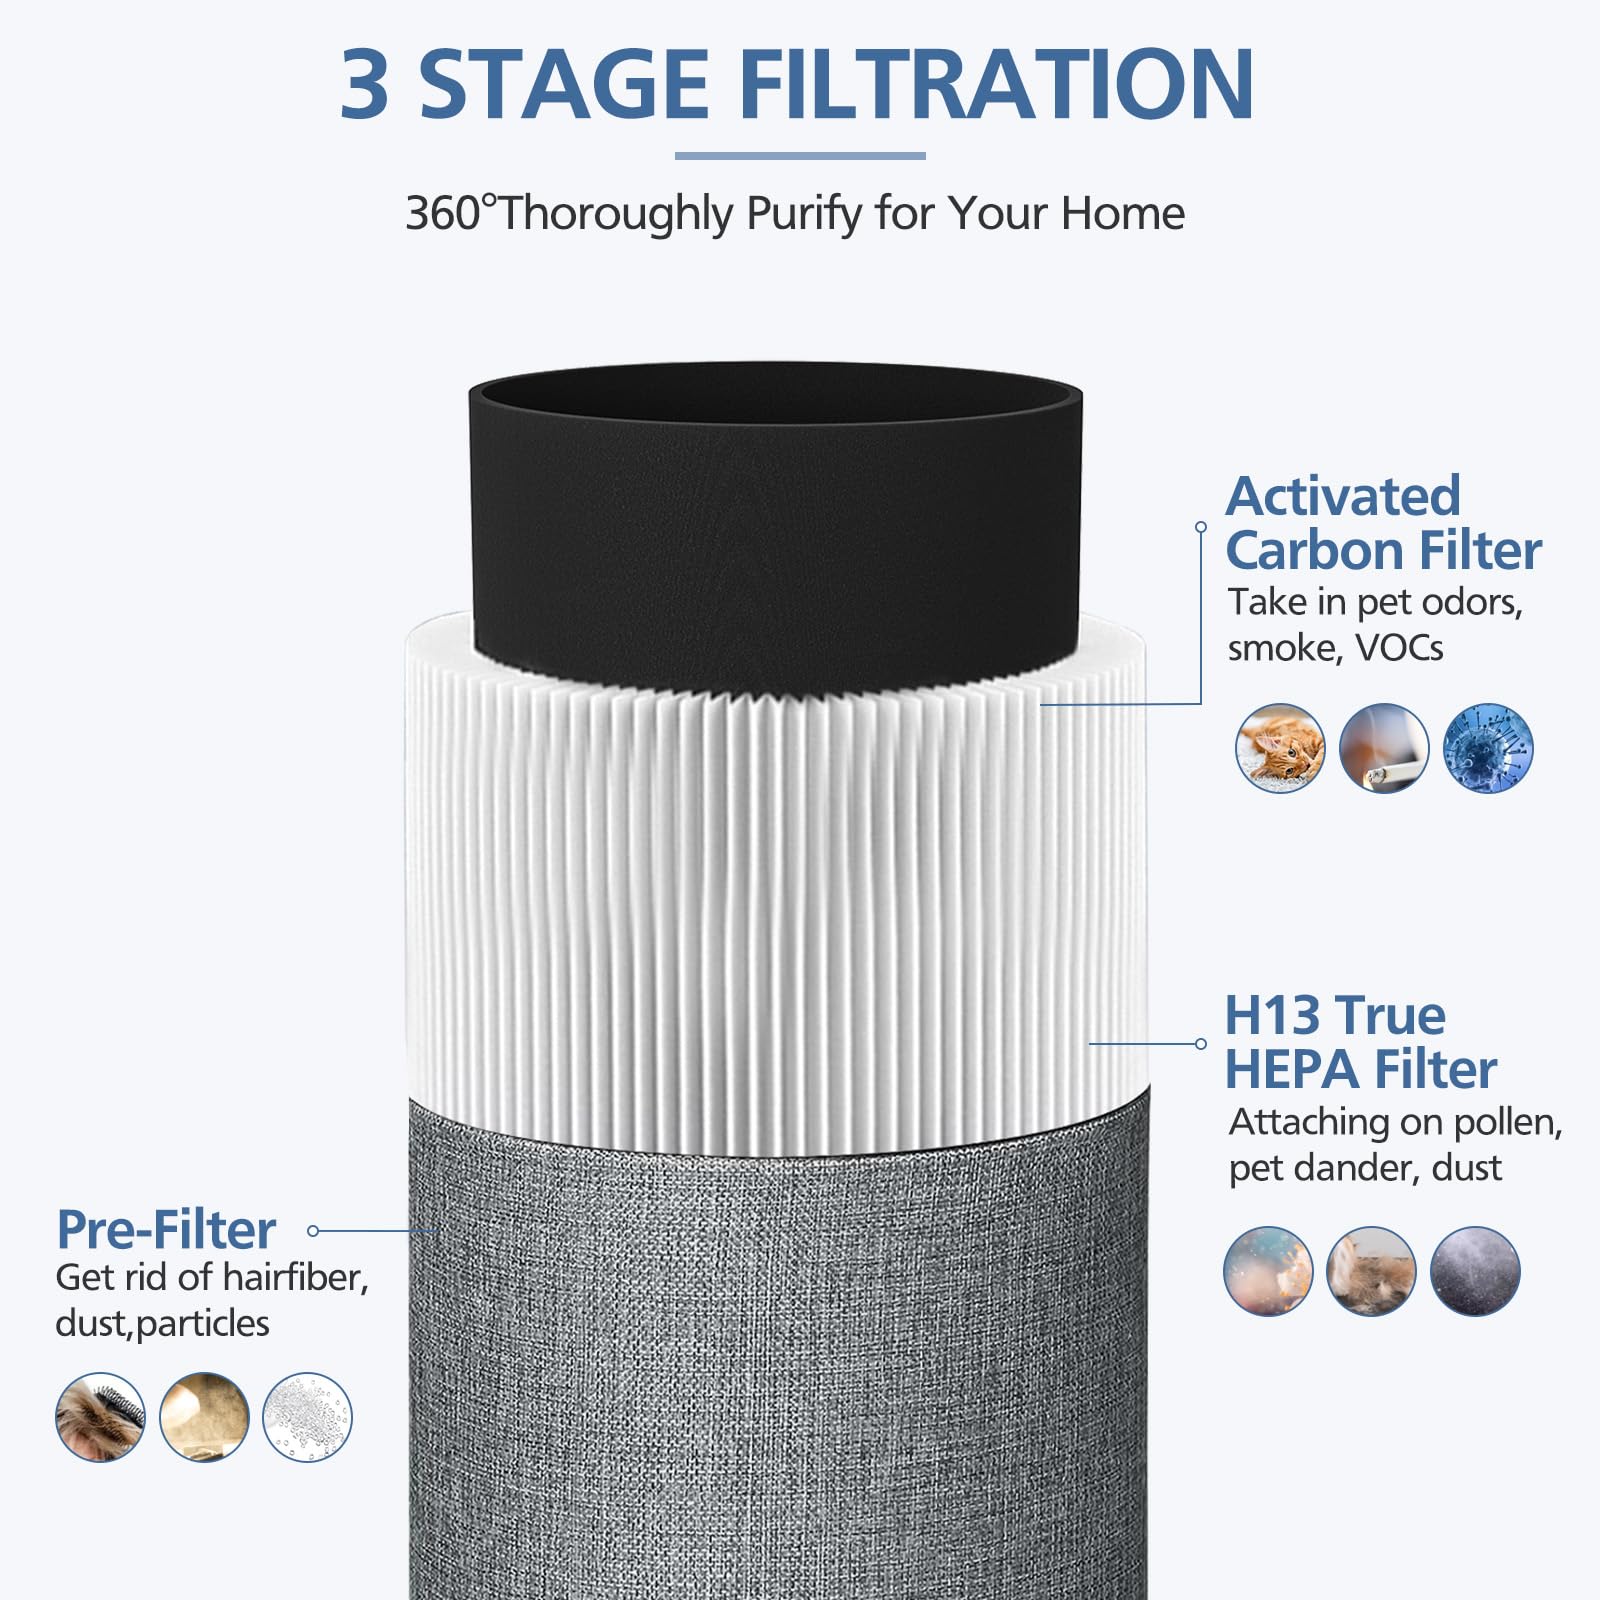 Cabiclean 2 Packs of Blue Pure 411 Replacement Filters for Blueair Blue Pure 411, 411+ and Mini Air Purifier.